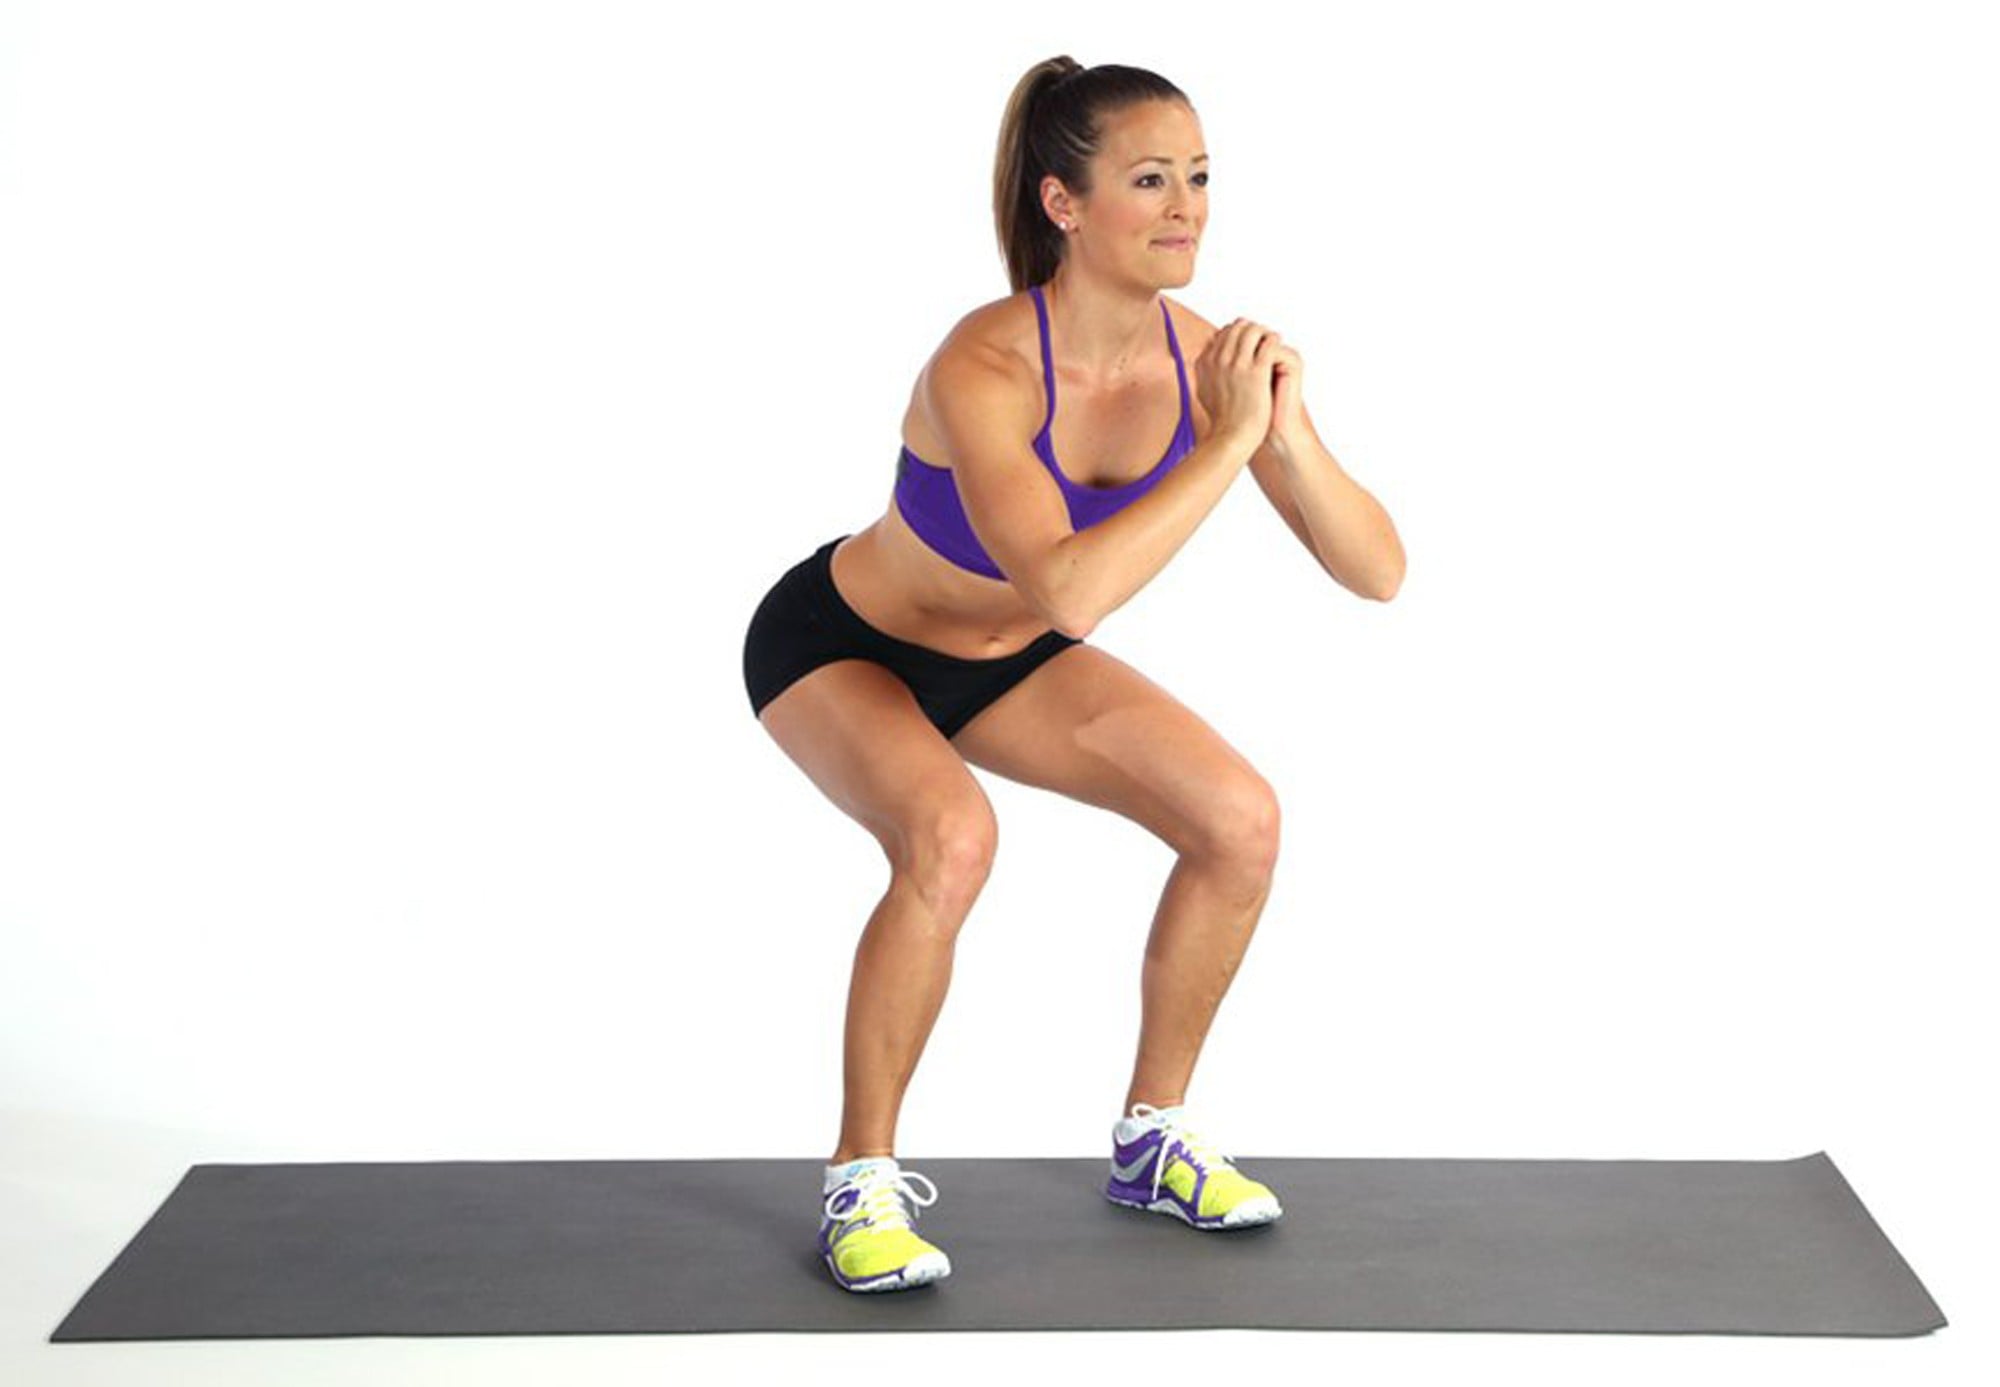 How to Do a Squat Correctly